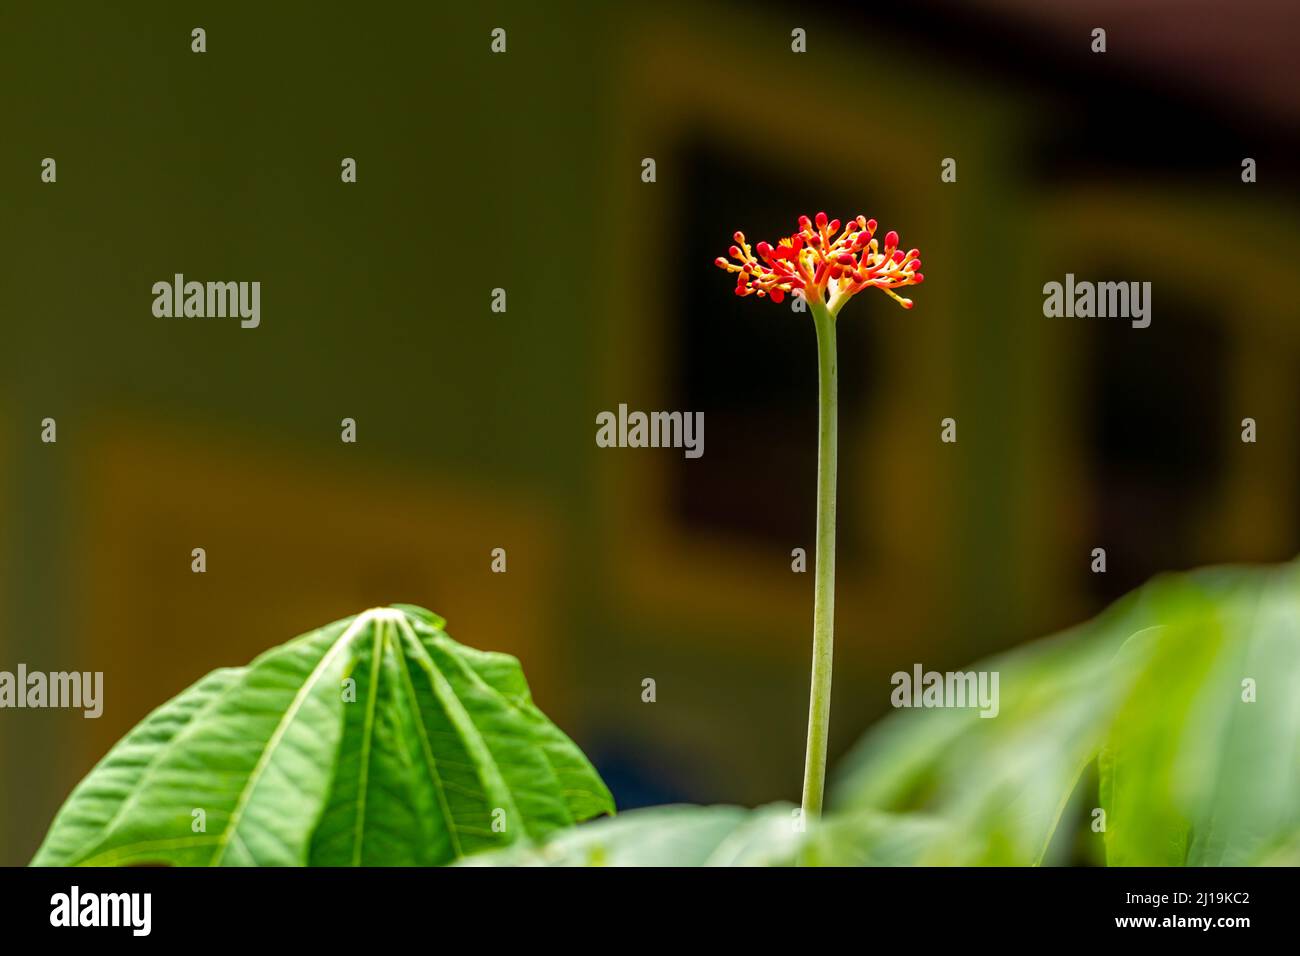 The jatropha plant has bright red flowers, when it becomes a fruit it will turn green, the background of the green leaves is blurry, natural concept Stock Photo